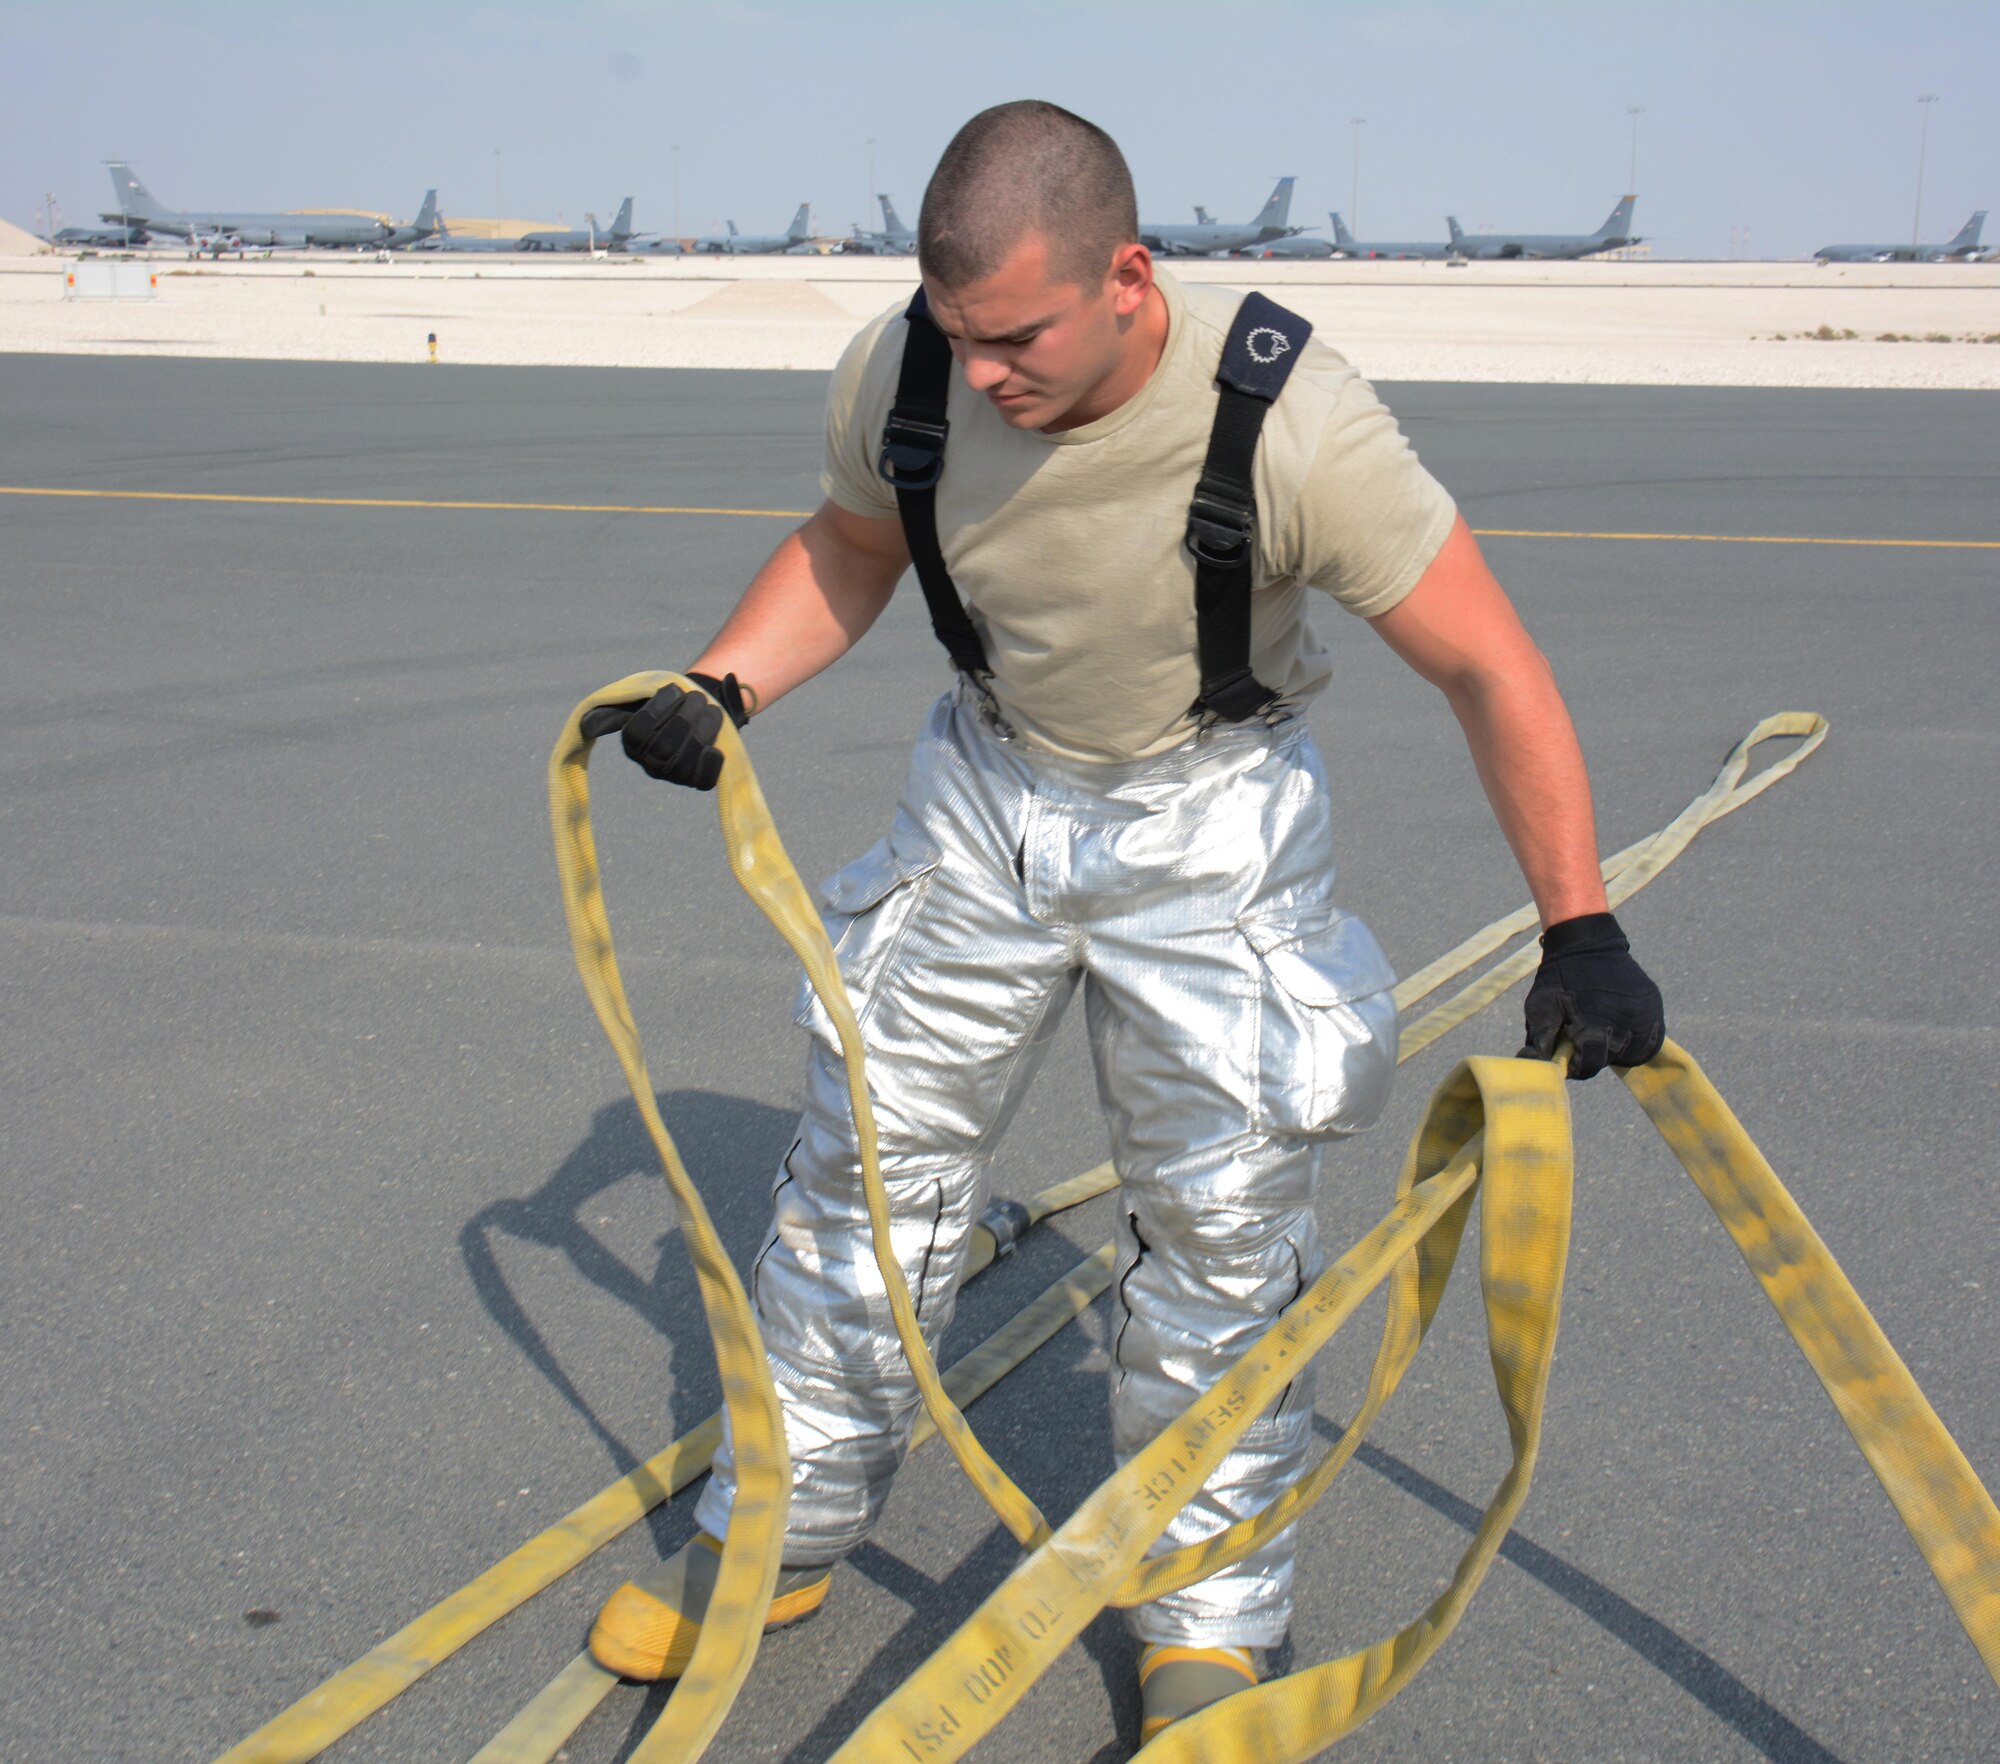 A 379th Civil Engineer Squadron firefighter works to put back a fire hose after a training exercise at Al Udeid Air Base, Qatar Nov. 20. The exercise featured a simulated fire on a KC-135 Stratotanker and required firefighters to rescue an injured air crew member. Within minutes, several firefighters climbed on to the plane's left wing, entered the aircraft and pulled the injured air crew member to safety. Training exercises help first responders maintain their skillsets. (U.S. Air Force photo by Tech. Sgt. James Hodgman/Released)